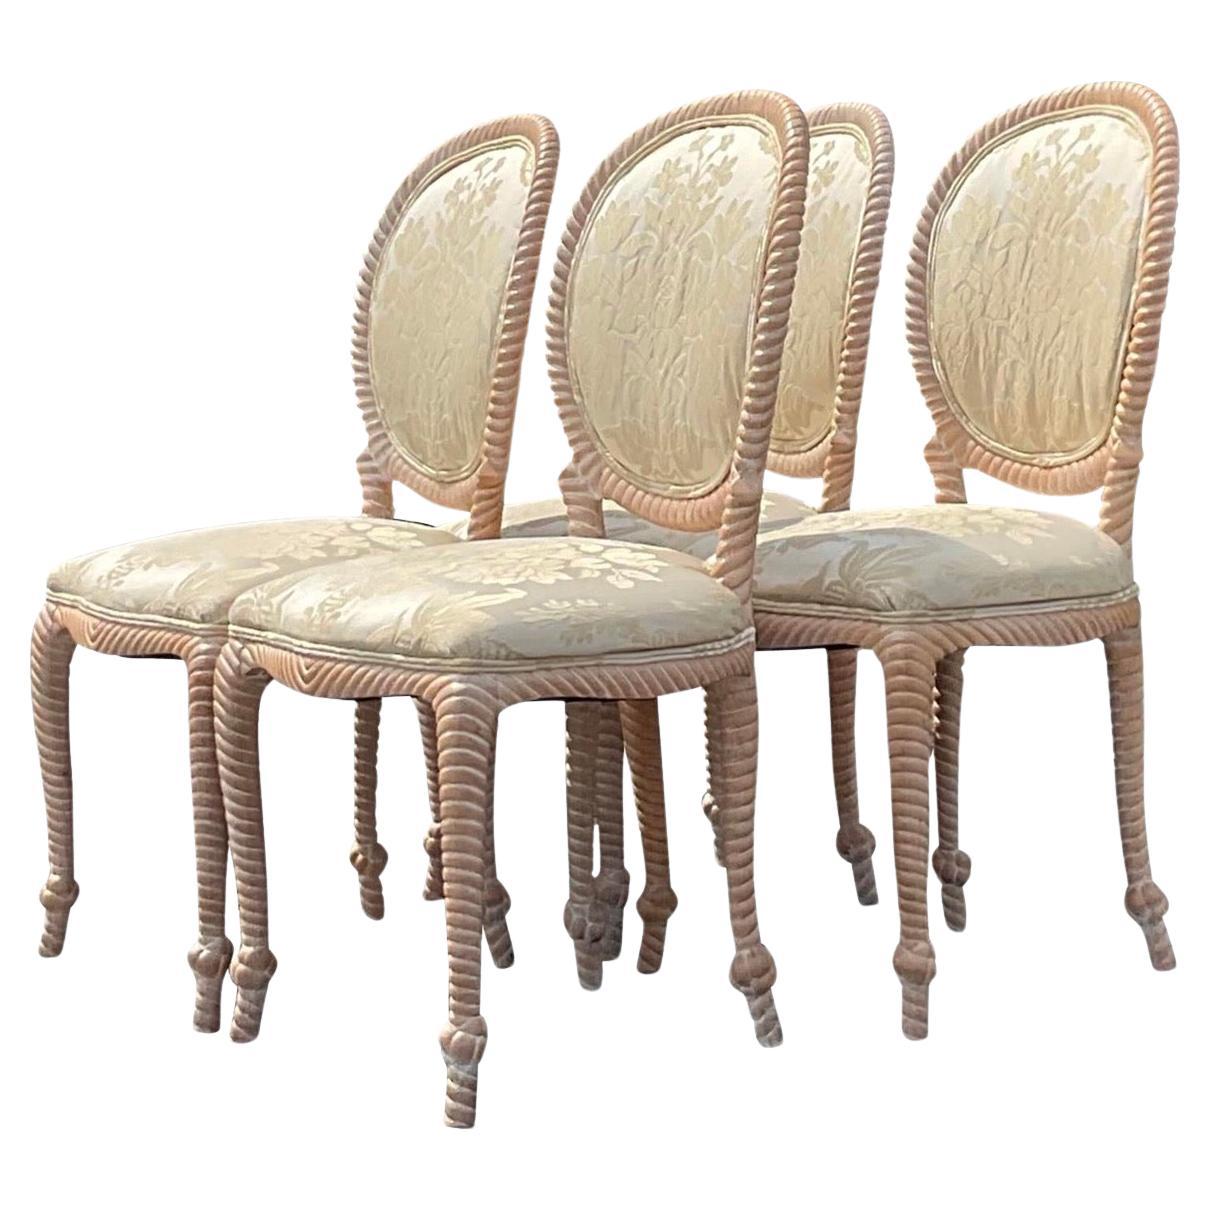 Vintage Coastal Carved Rope Dining Chairs - Set of 4 For Sale